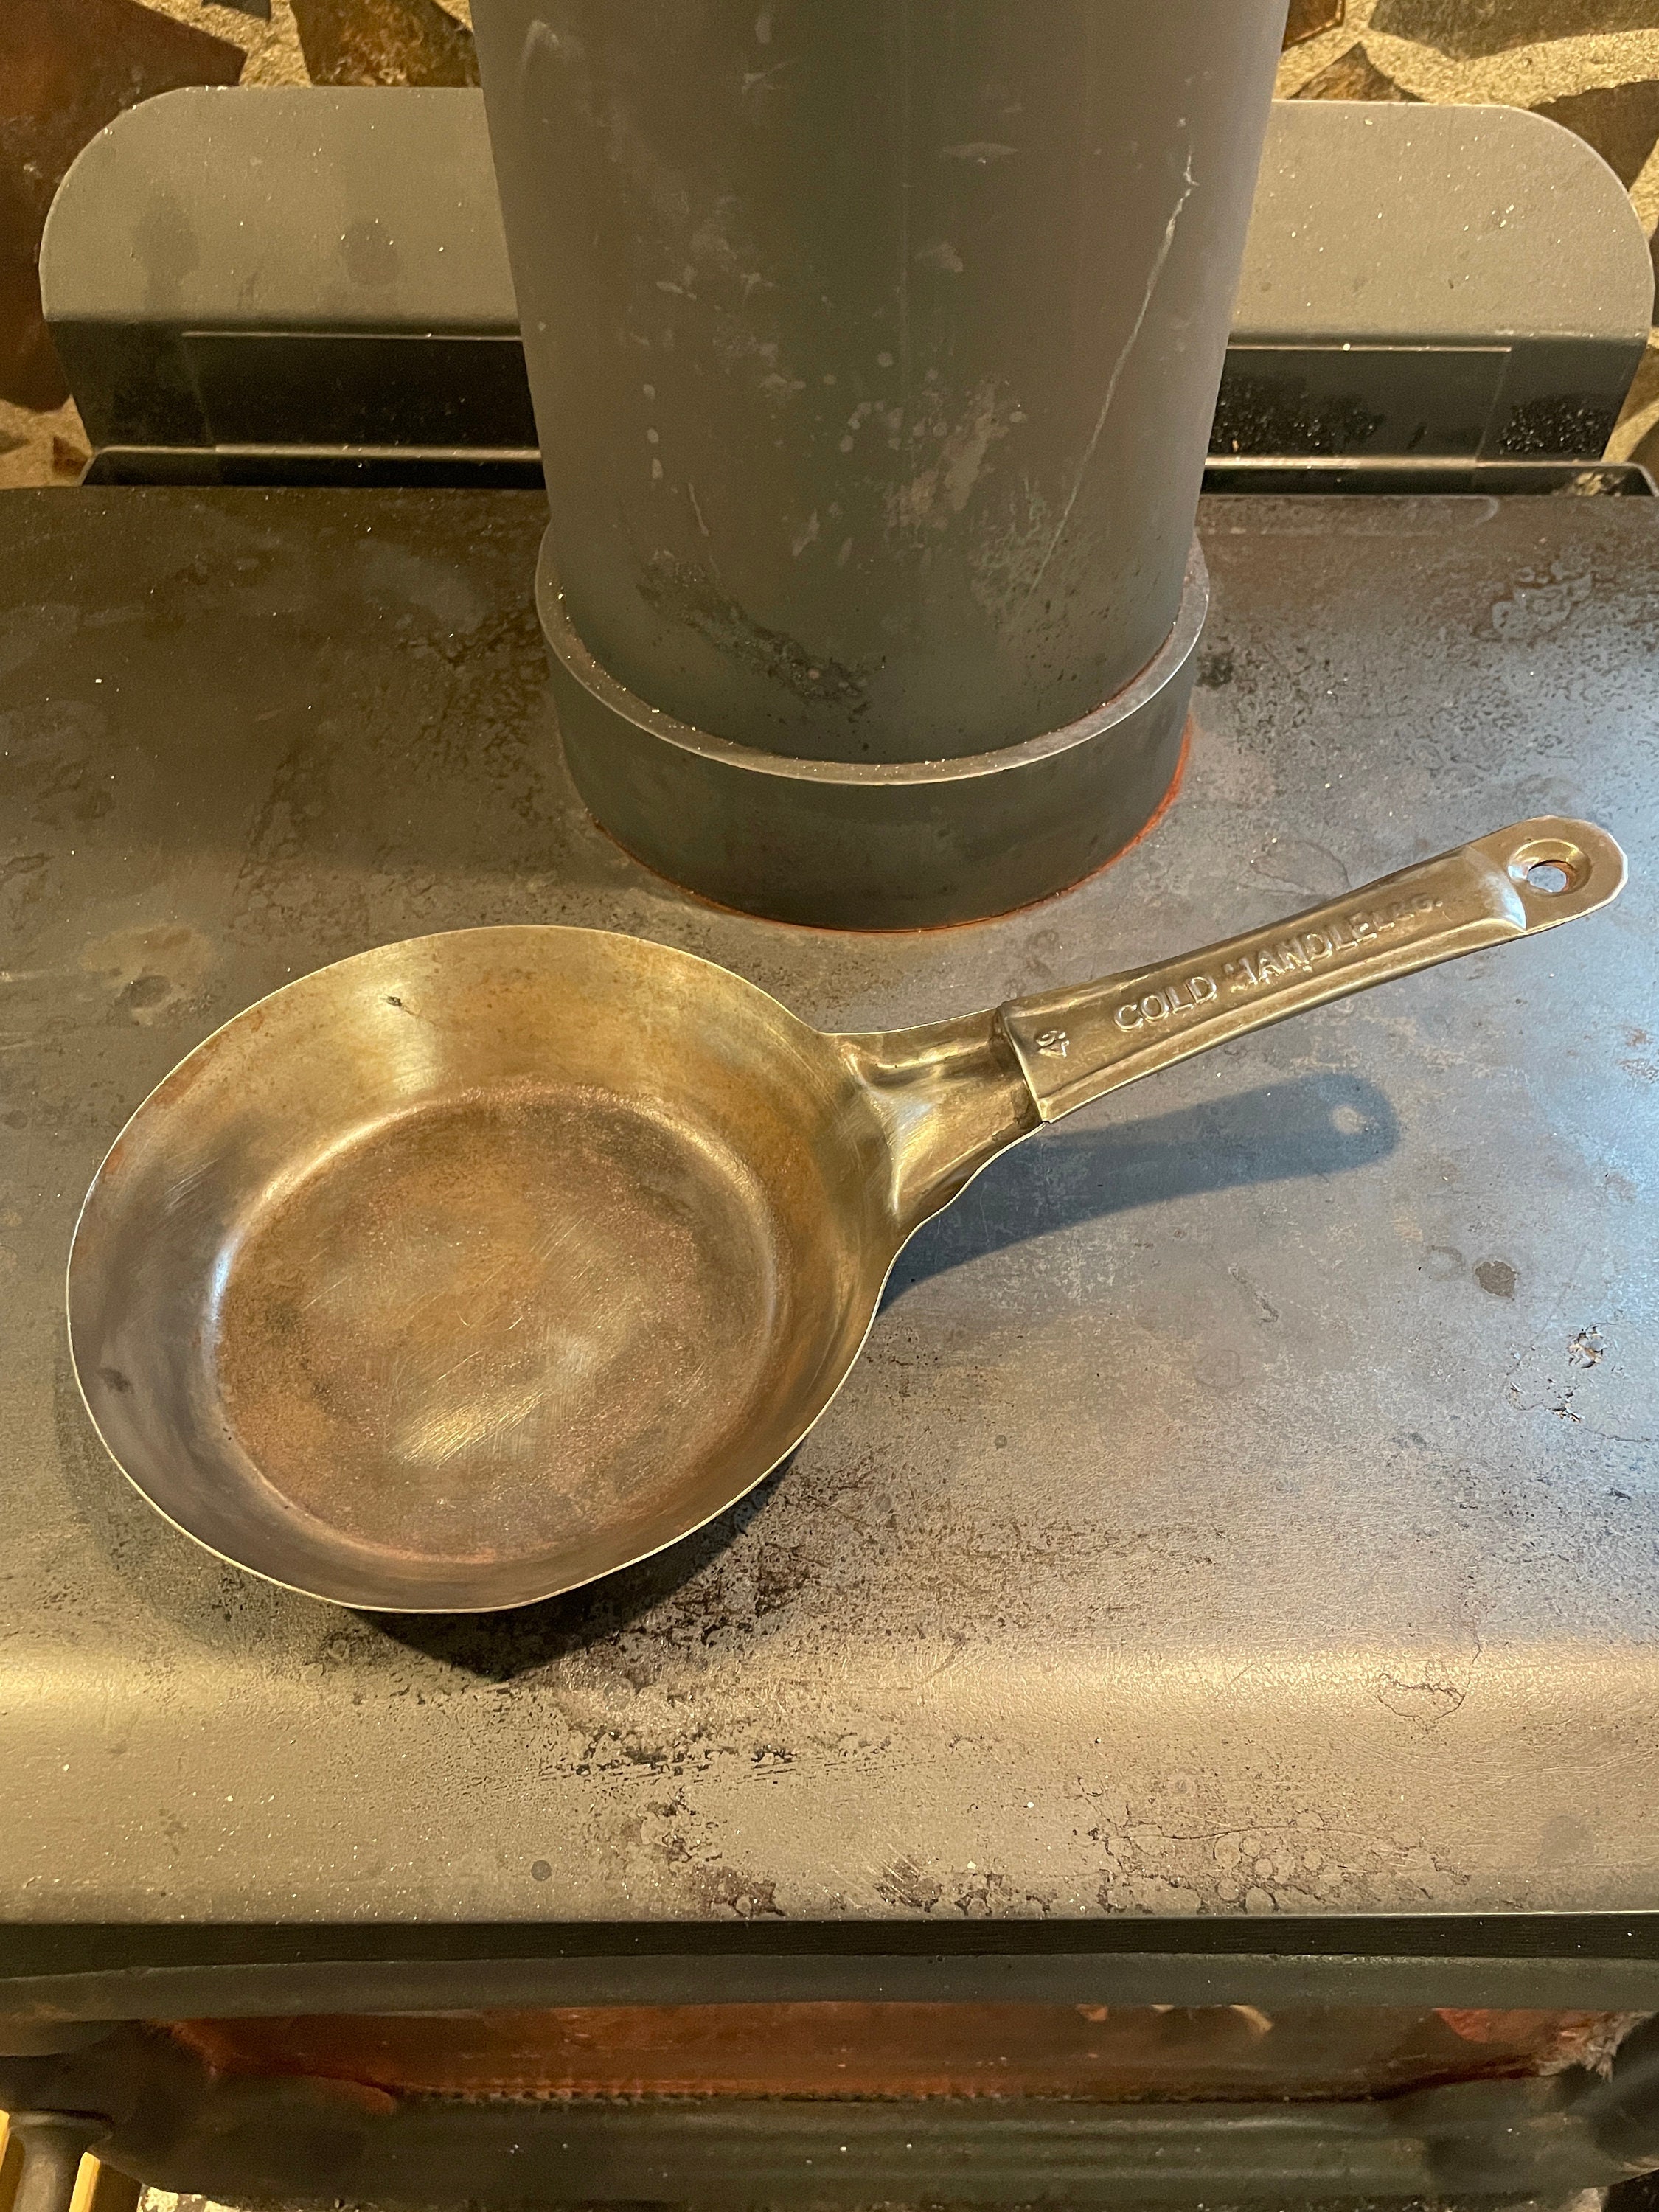 Acme Cold Handle Skillet coming along! : r/carbonsteel